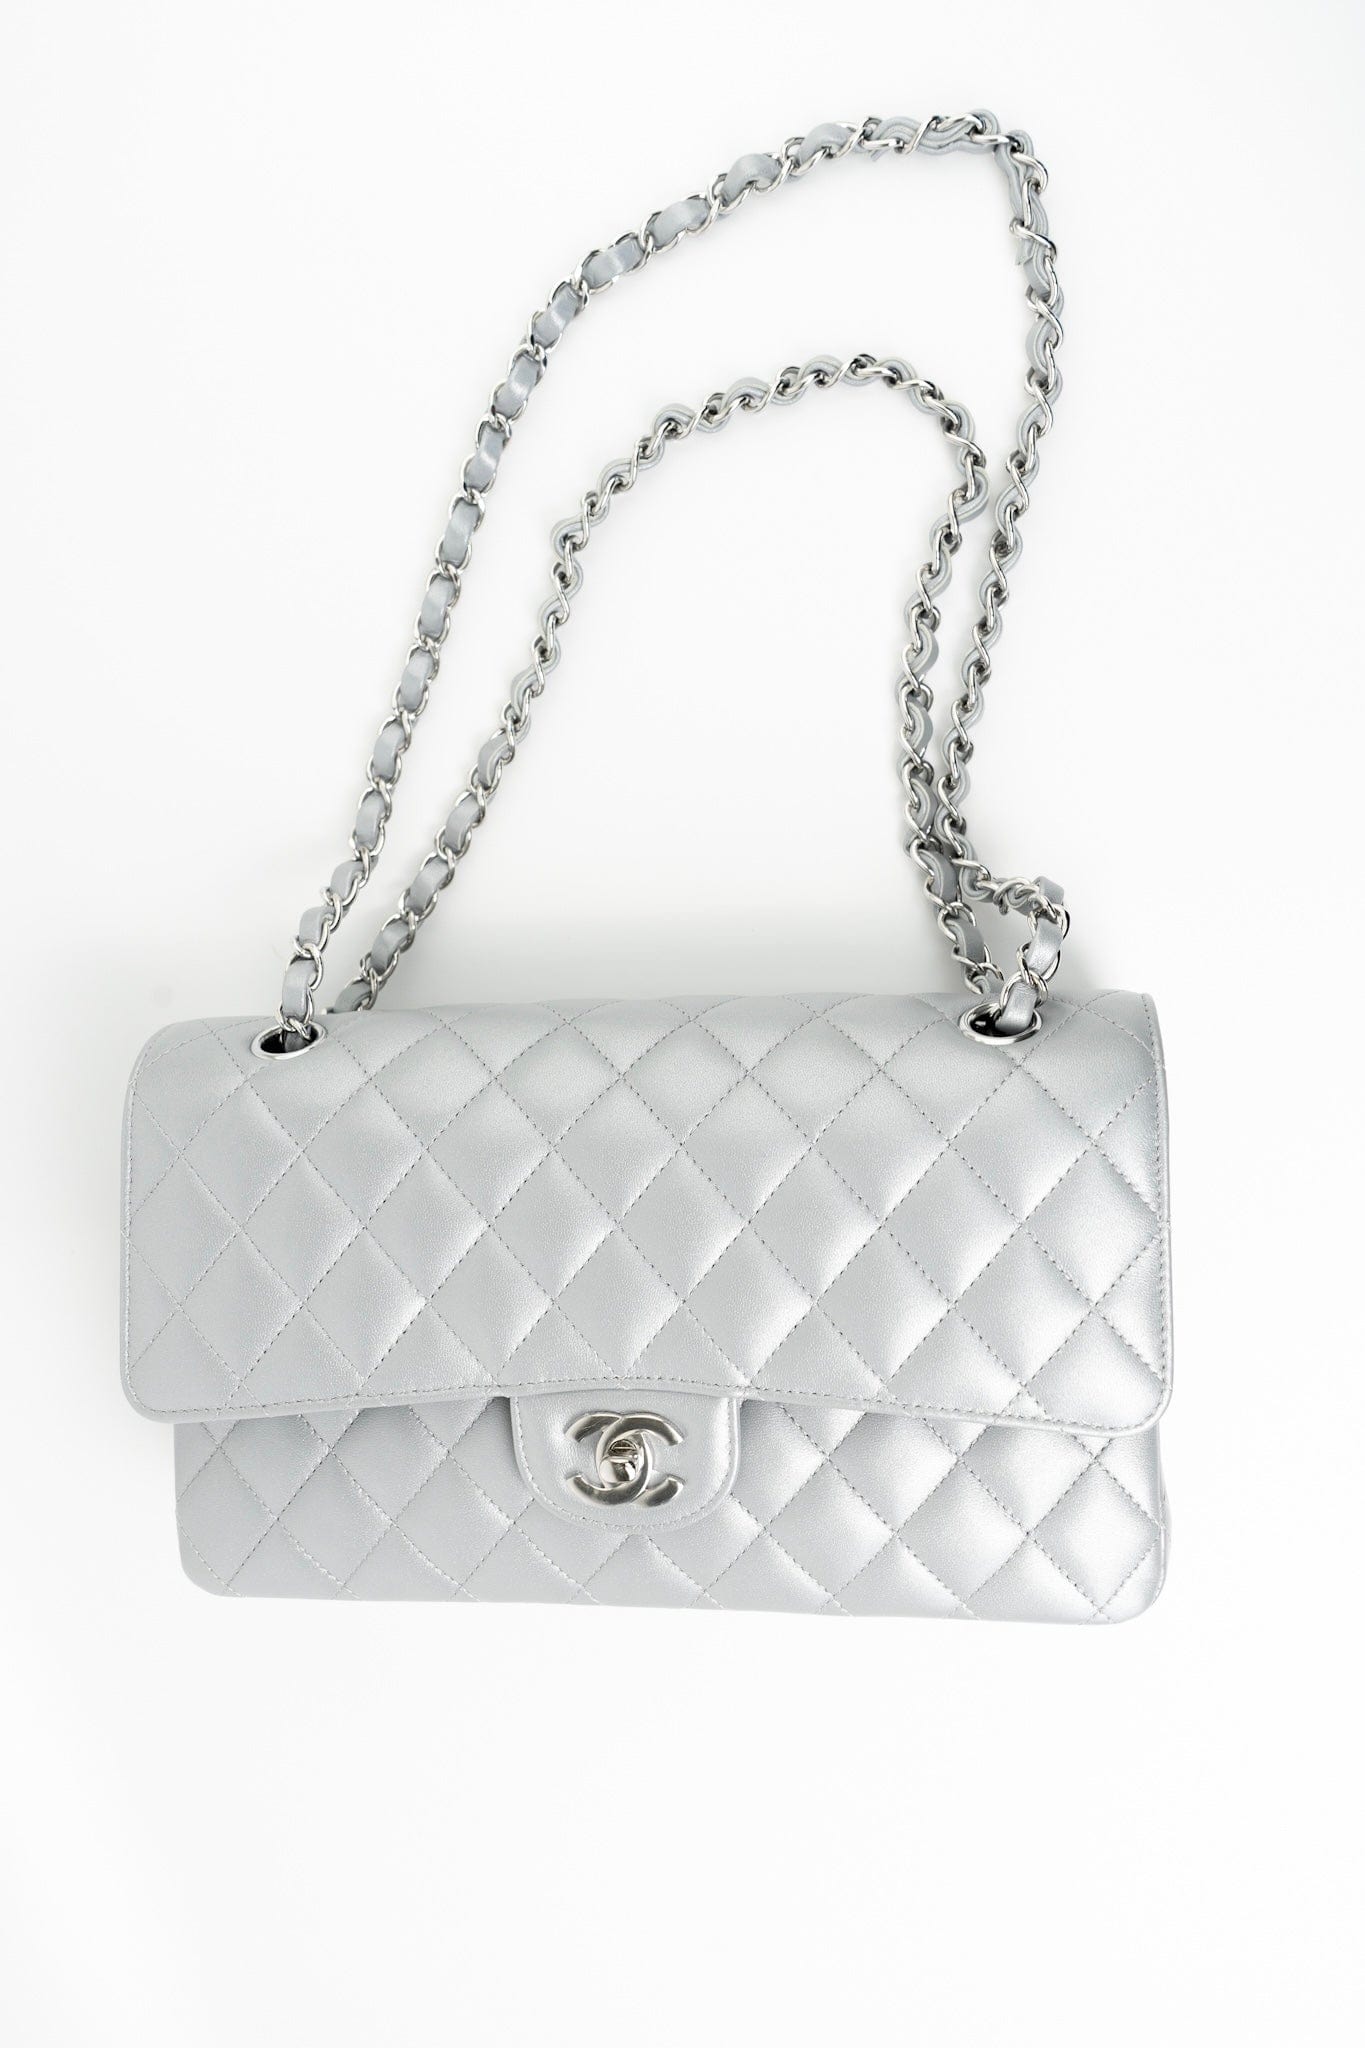 CHANEL Classic Double Flap Small Shoulder Bag White Lambskin from Japan |  eBay